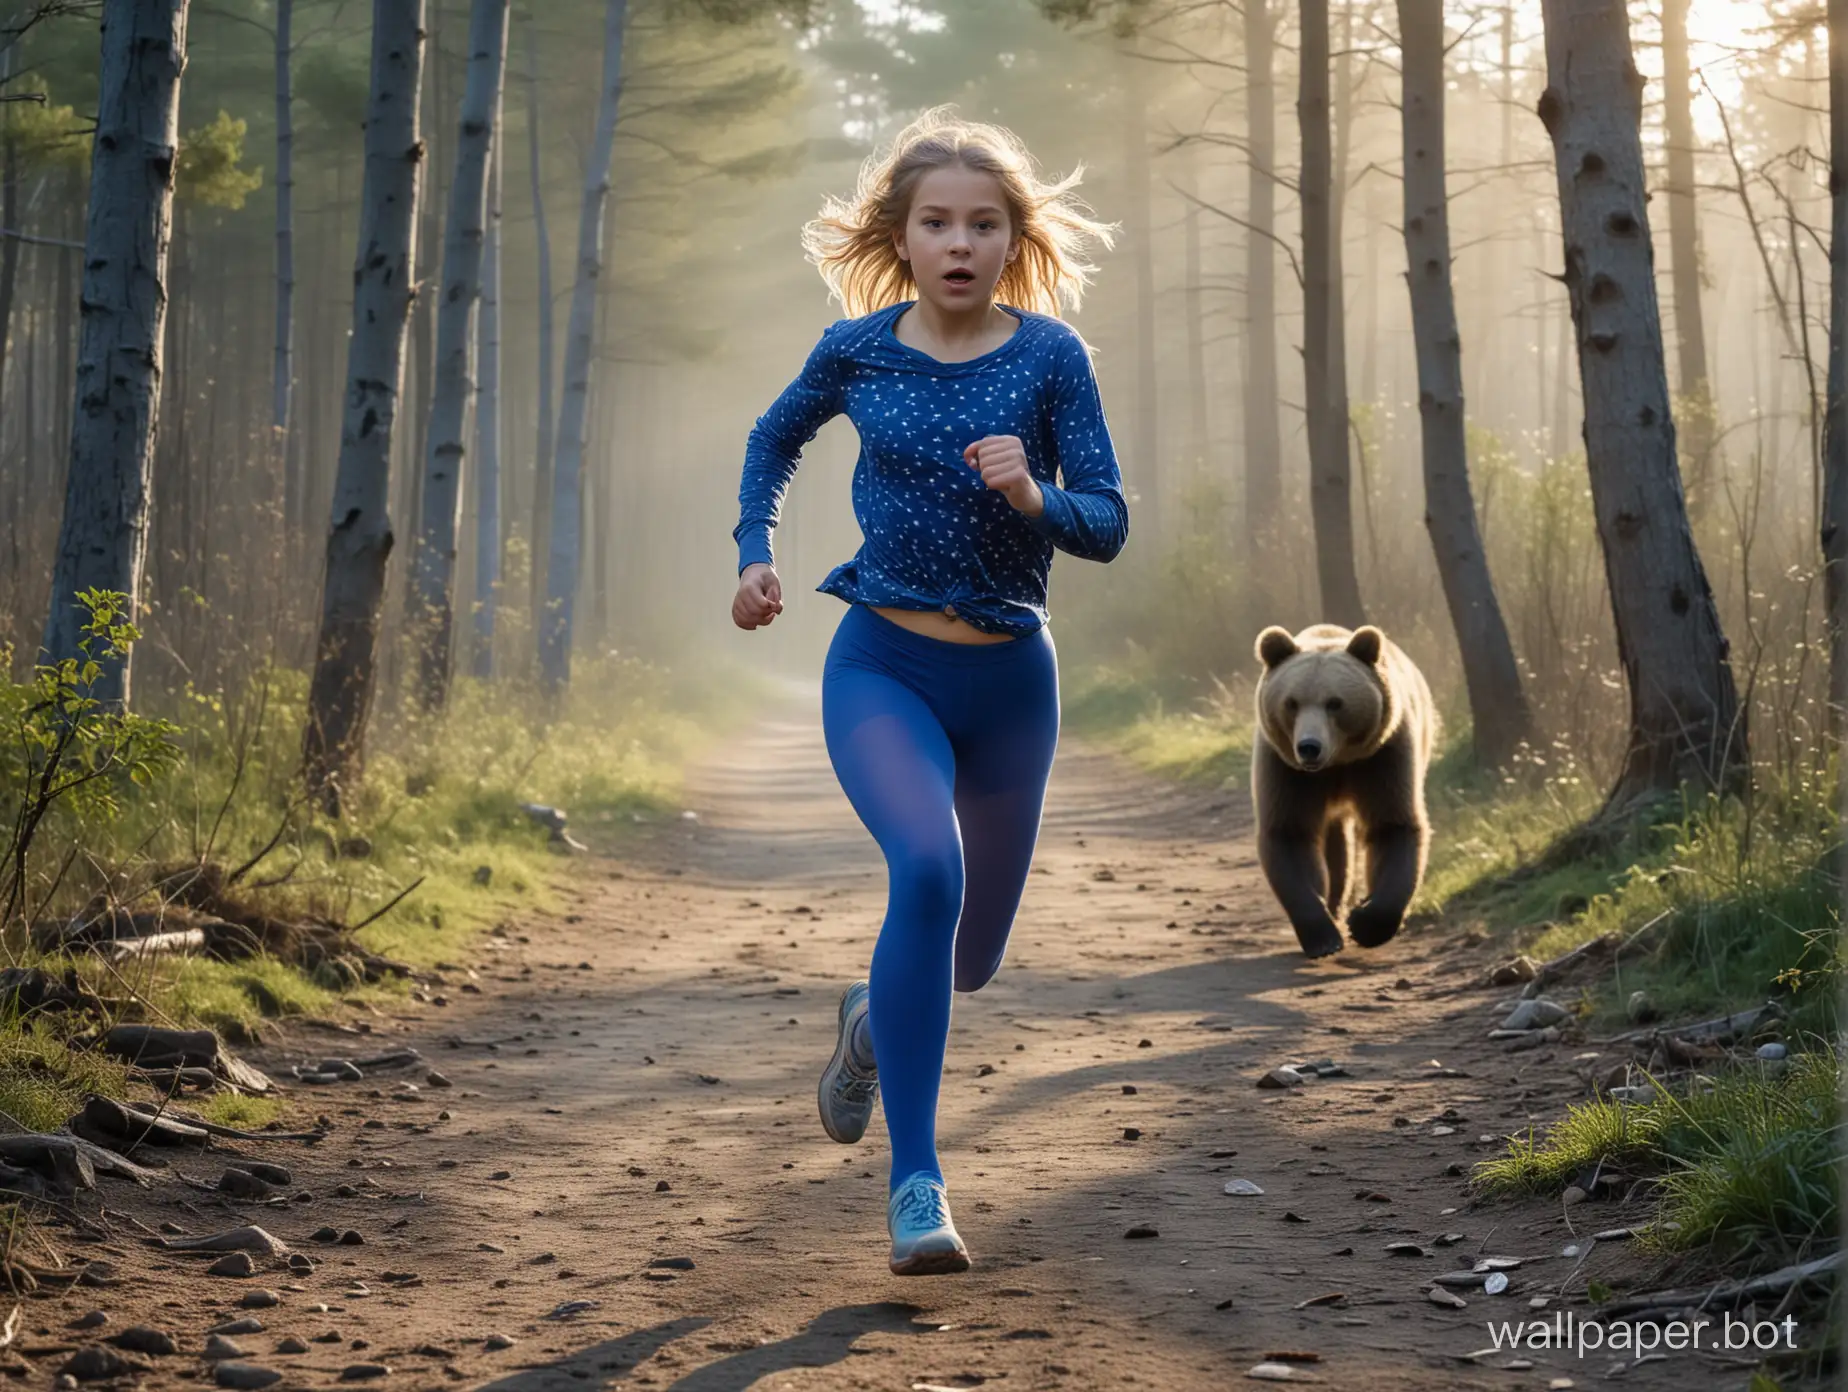 A young girl is running away from a bear in the forest. She didn't have time to get dressed. She is only wearing a shirt and blue tights. She is running along a forest trail early in the morning.